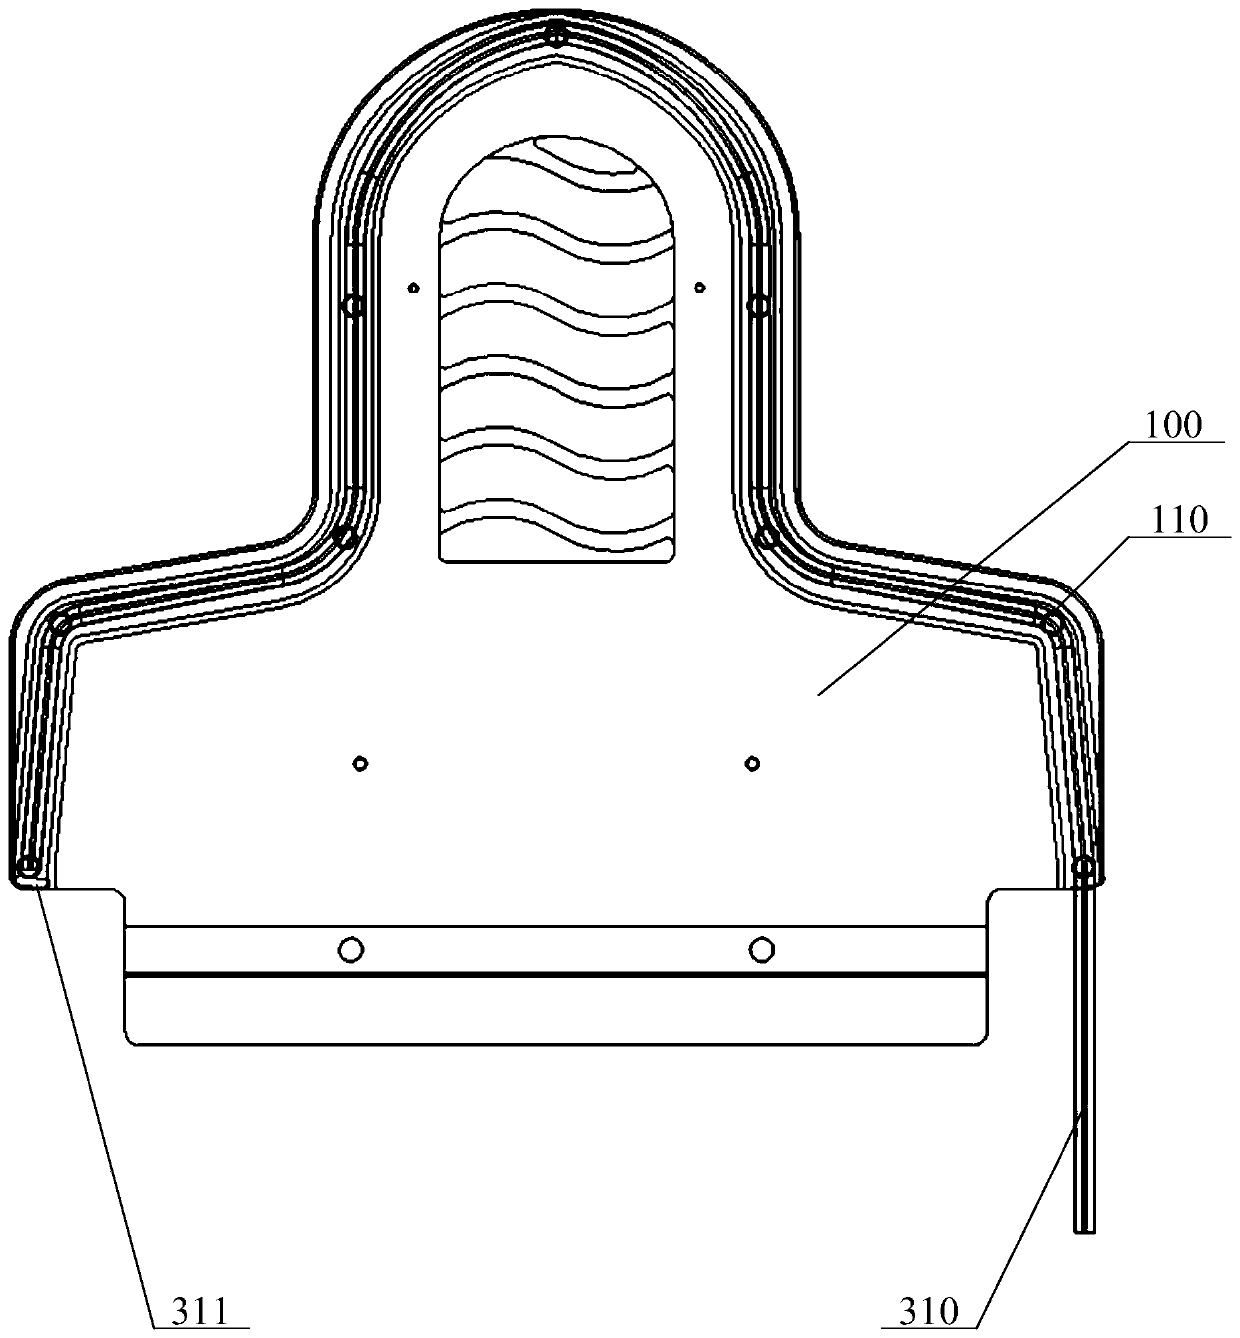 Unlocking assembly and human body fixing device